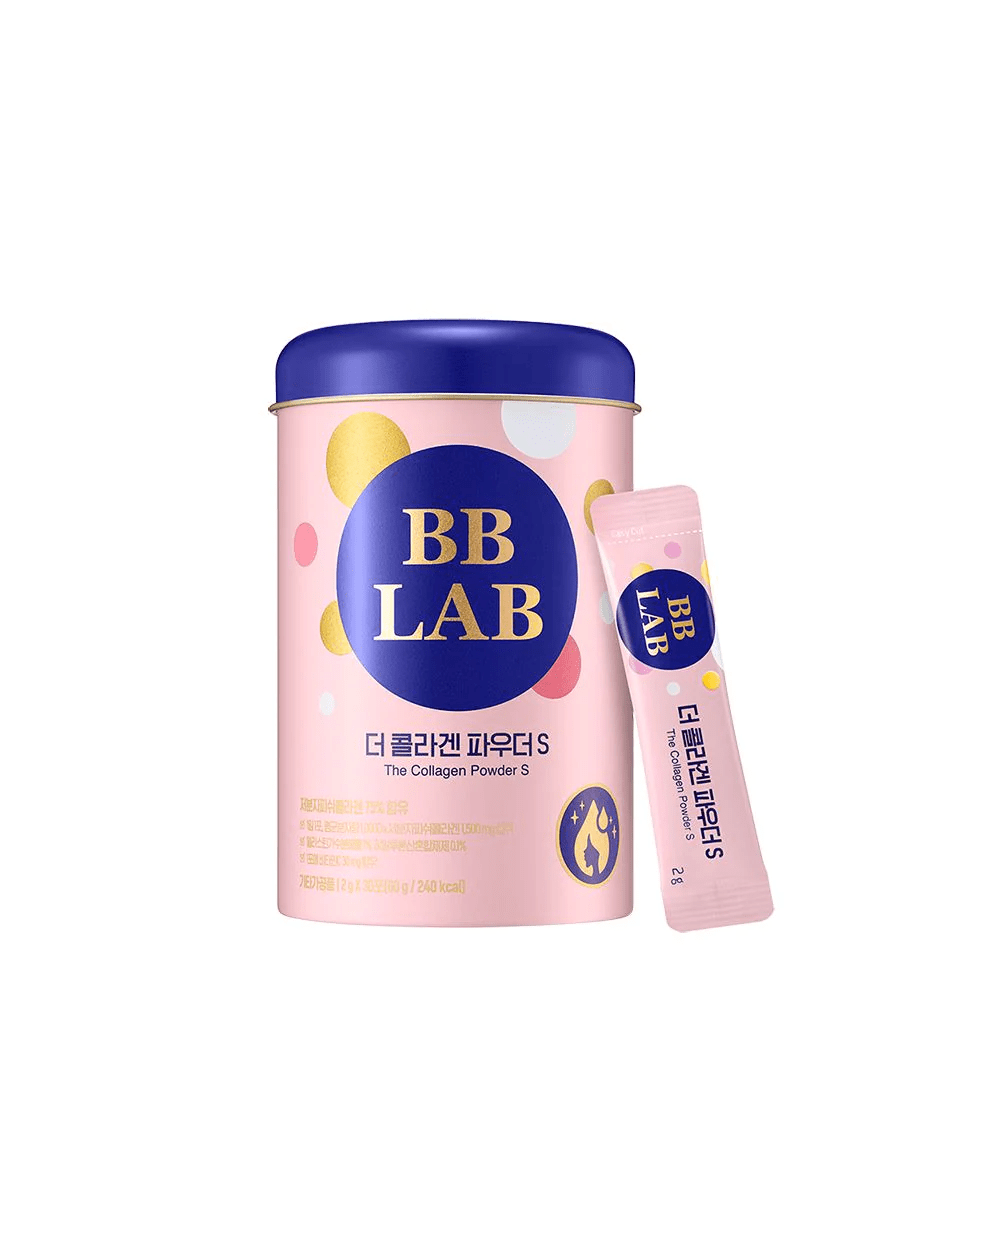 skincare-kbeauty-glowtime-bb lab the collagen powder s